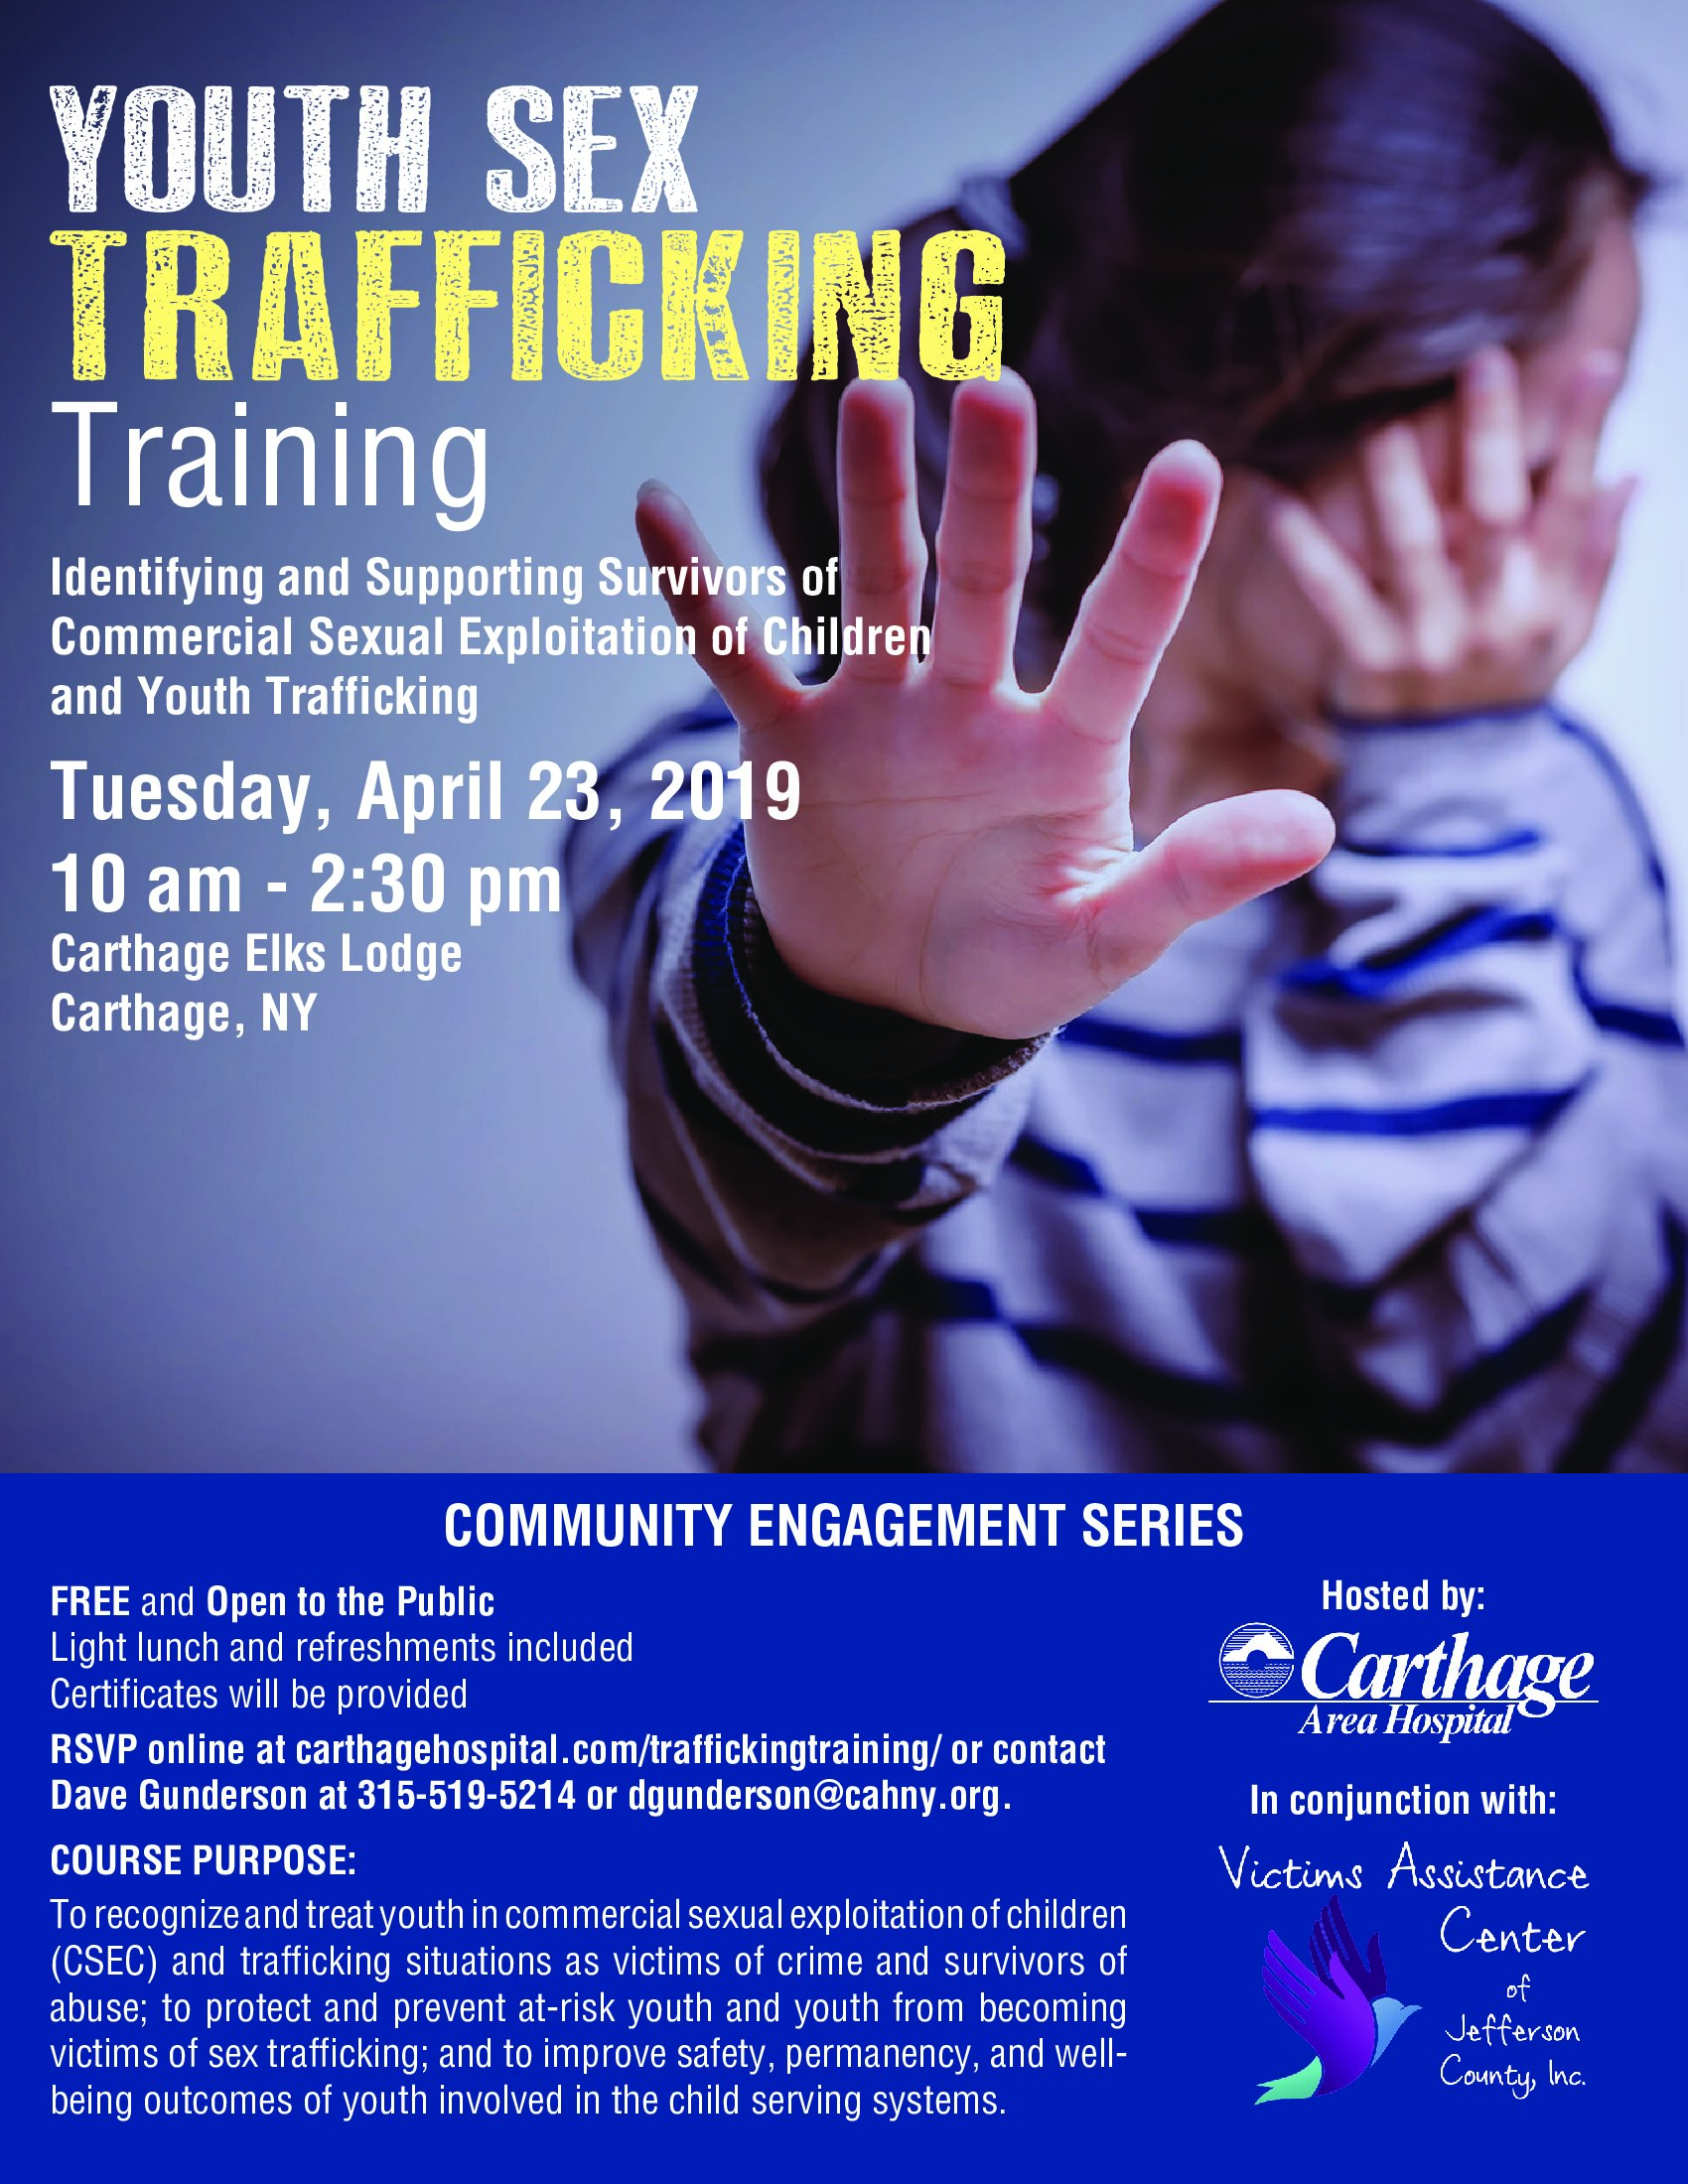 Youth Sex Trafficking Awareness Training Scheduled For April Rd